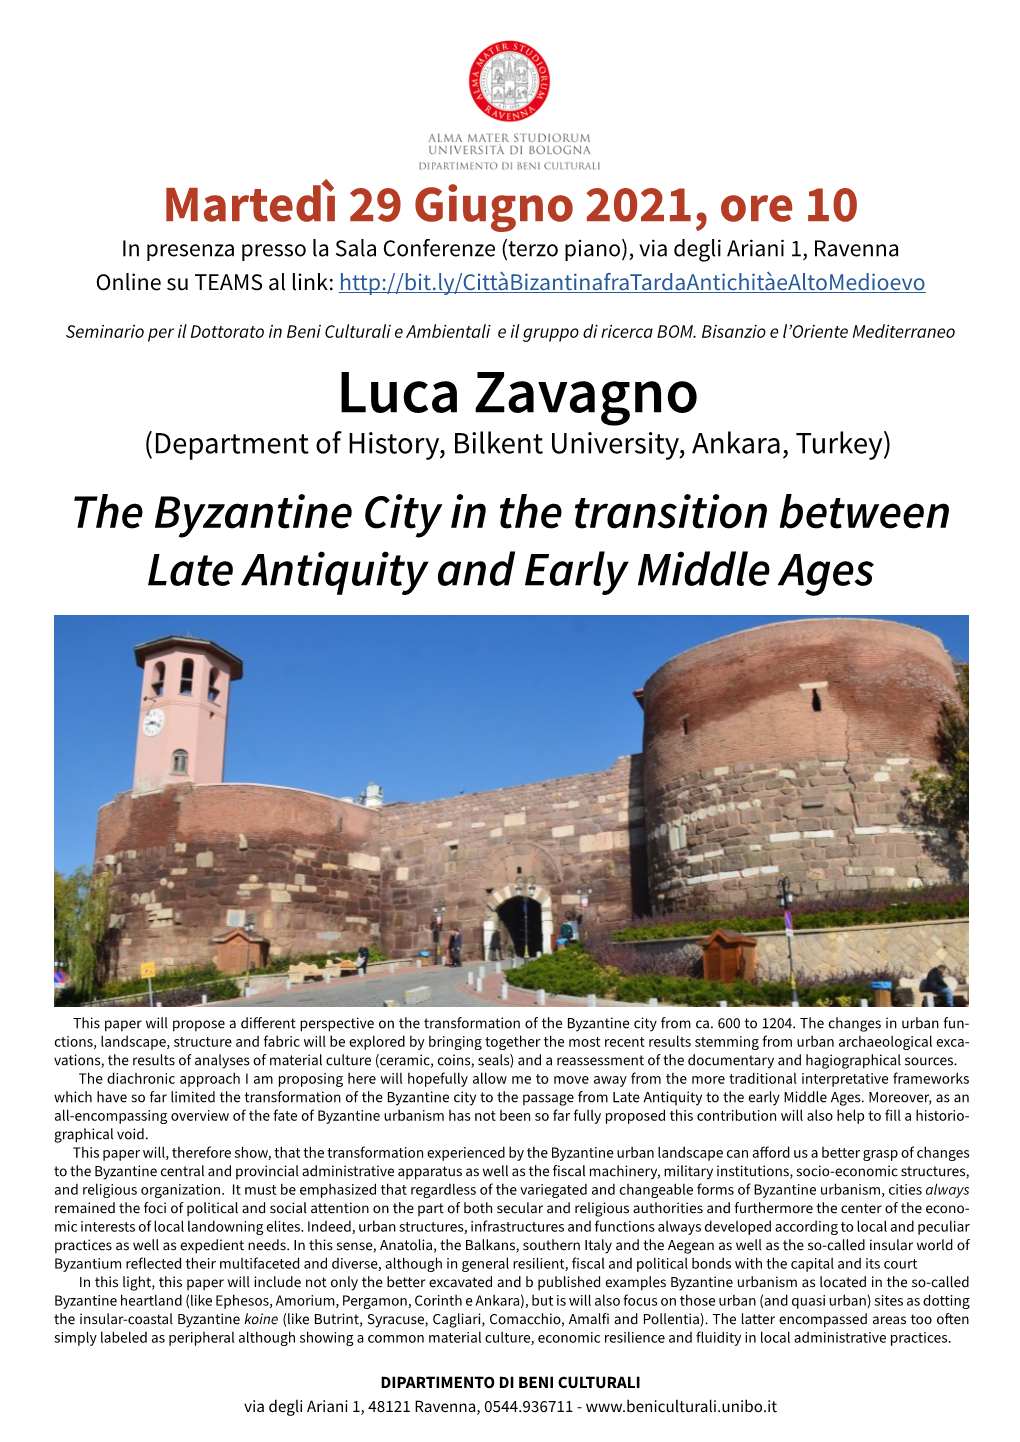 Luca Zavagno (Department of History, Bilkent University, Ankara, Turkey) the Byzantine City in the Transition Between Late Antiquity and Early Middle Ages